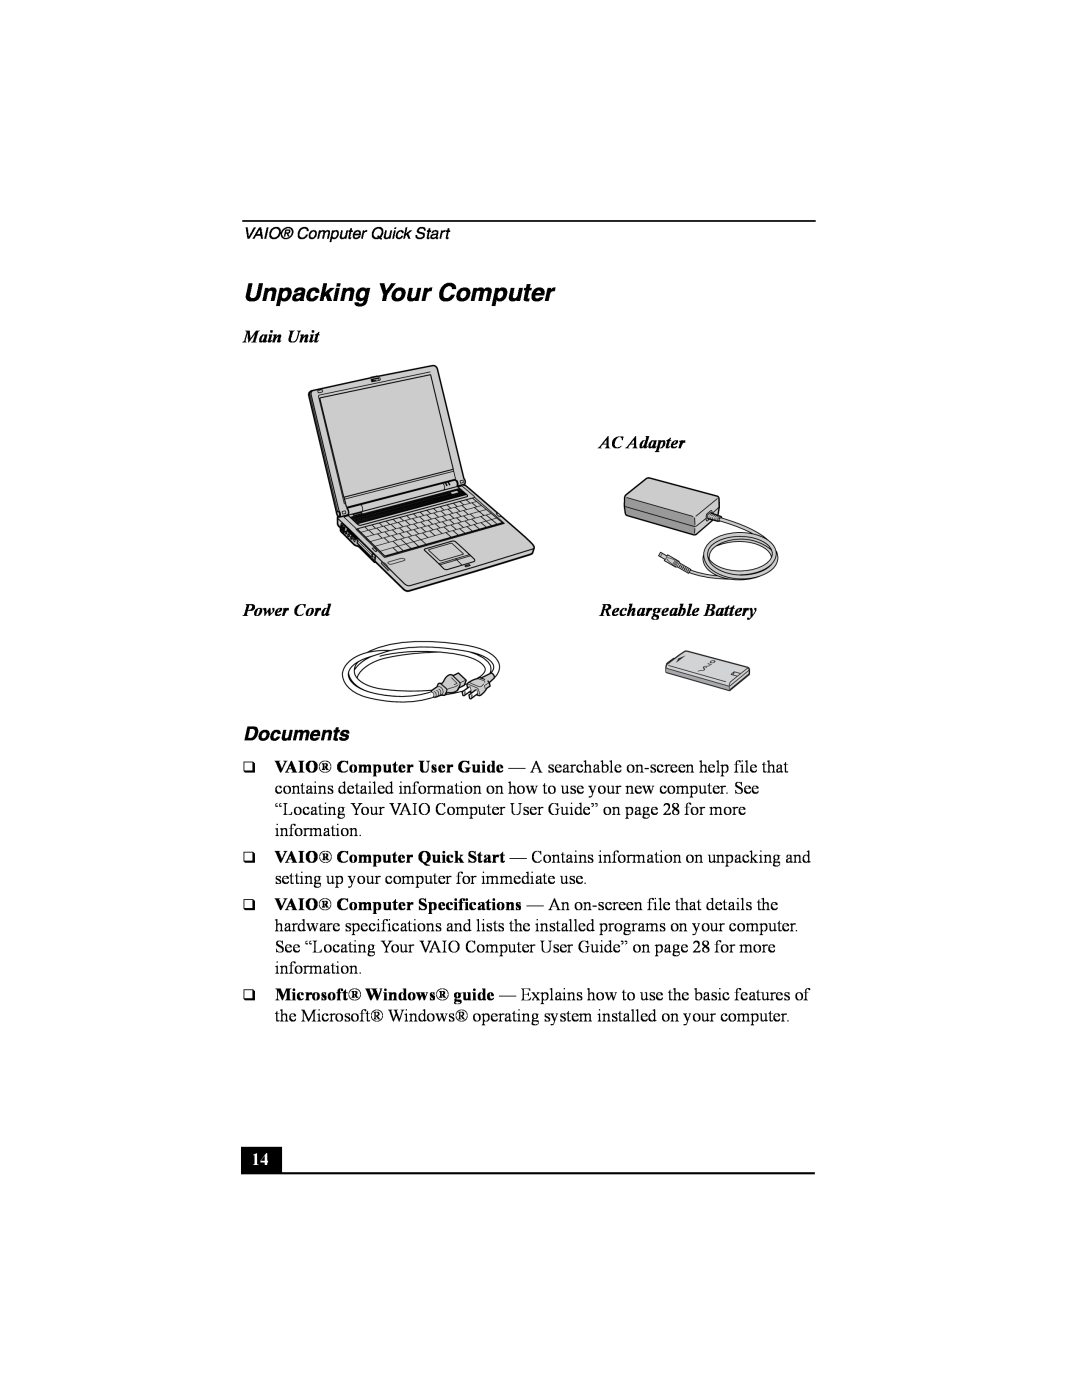 Sony PCG-FRV manual Unpacking Your Computer, Documents, Main Unit AC Adapter, Power Cord 